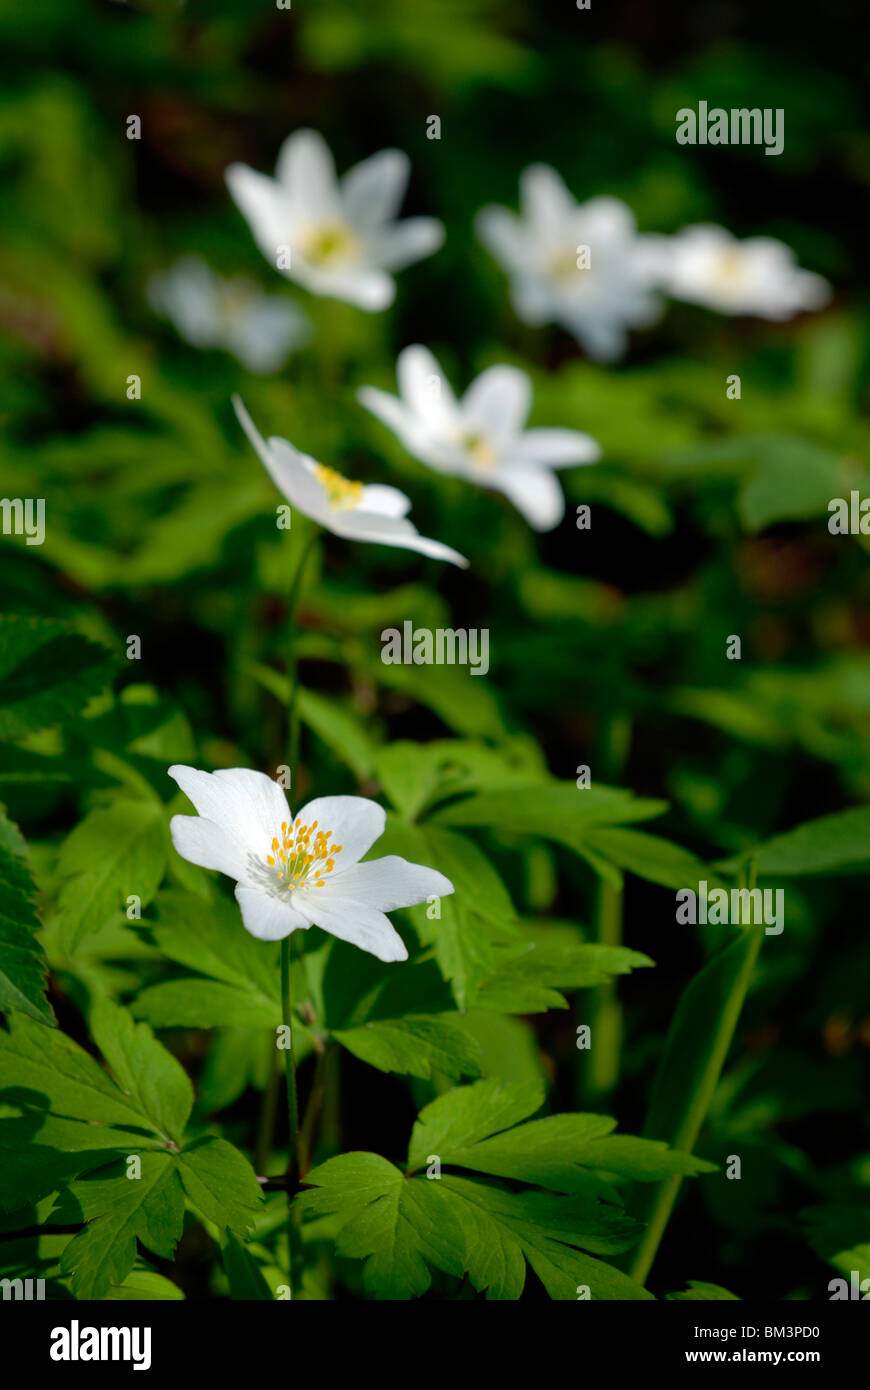 Anemone nemorosa, blooming Wood anemones in the woodland at the spring time. Porvoo, Finland, Scandinavia, Europe. Stock Photo